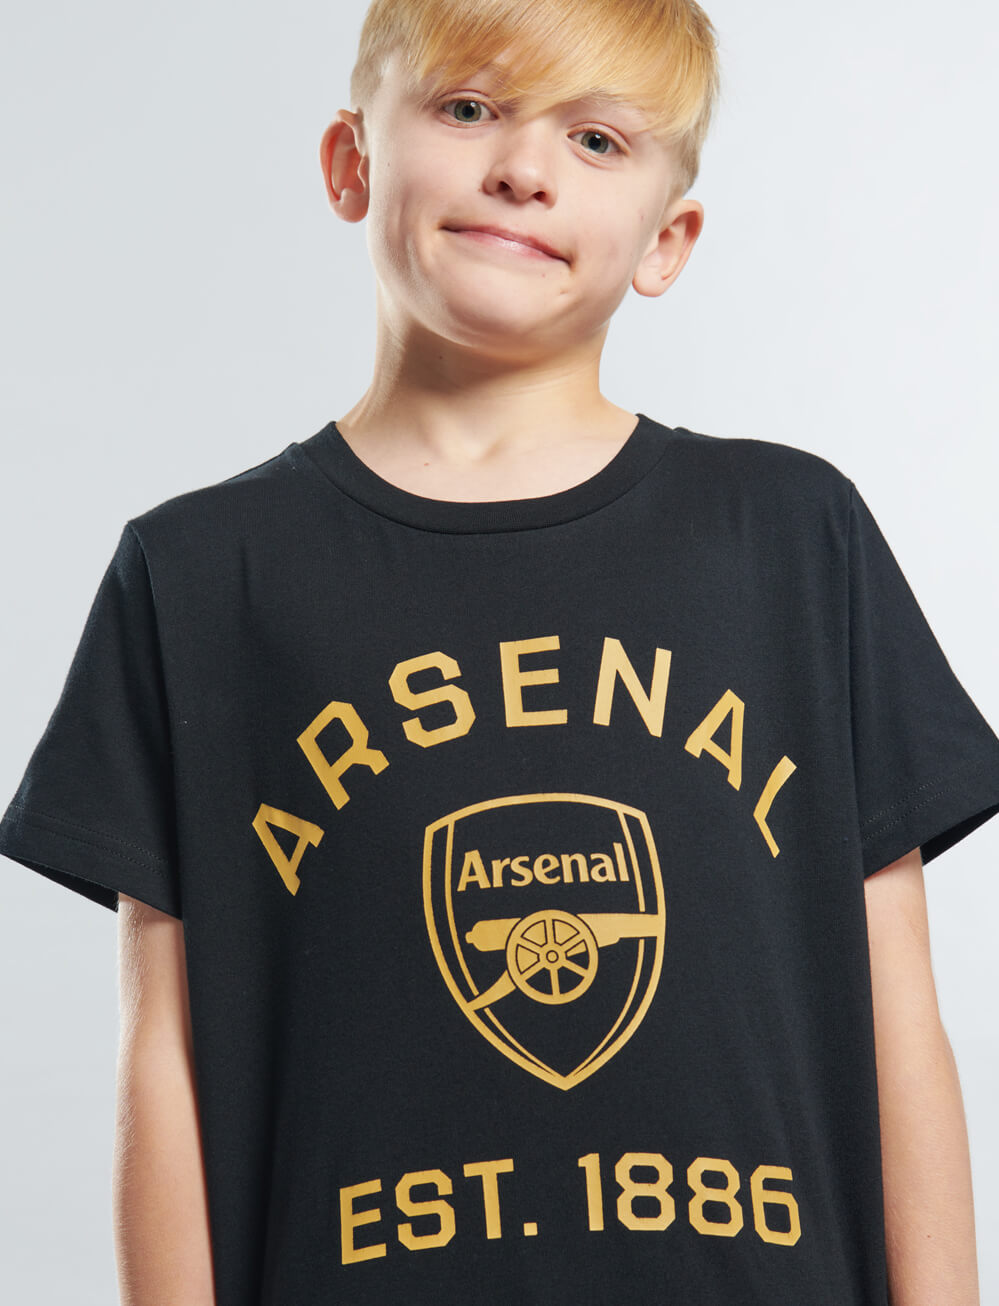 Official Arsenal Kids Graphic T-Shirt - Black - The World Football Store